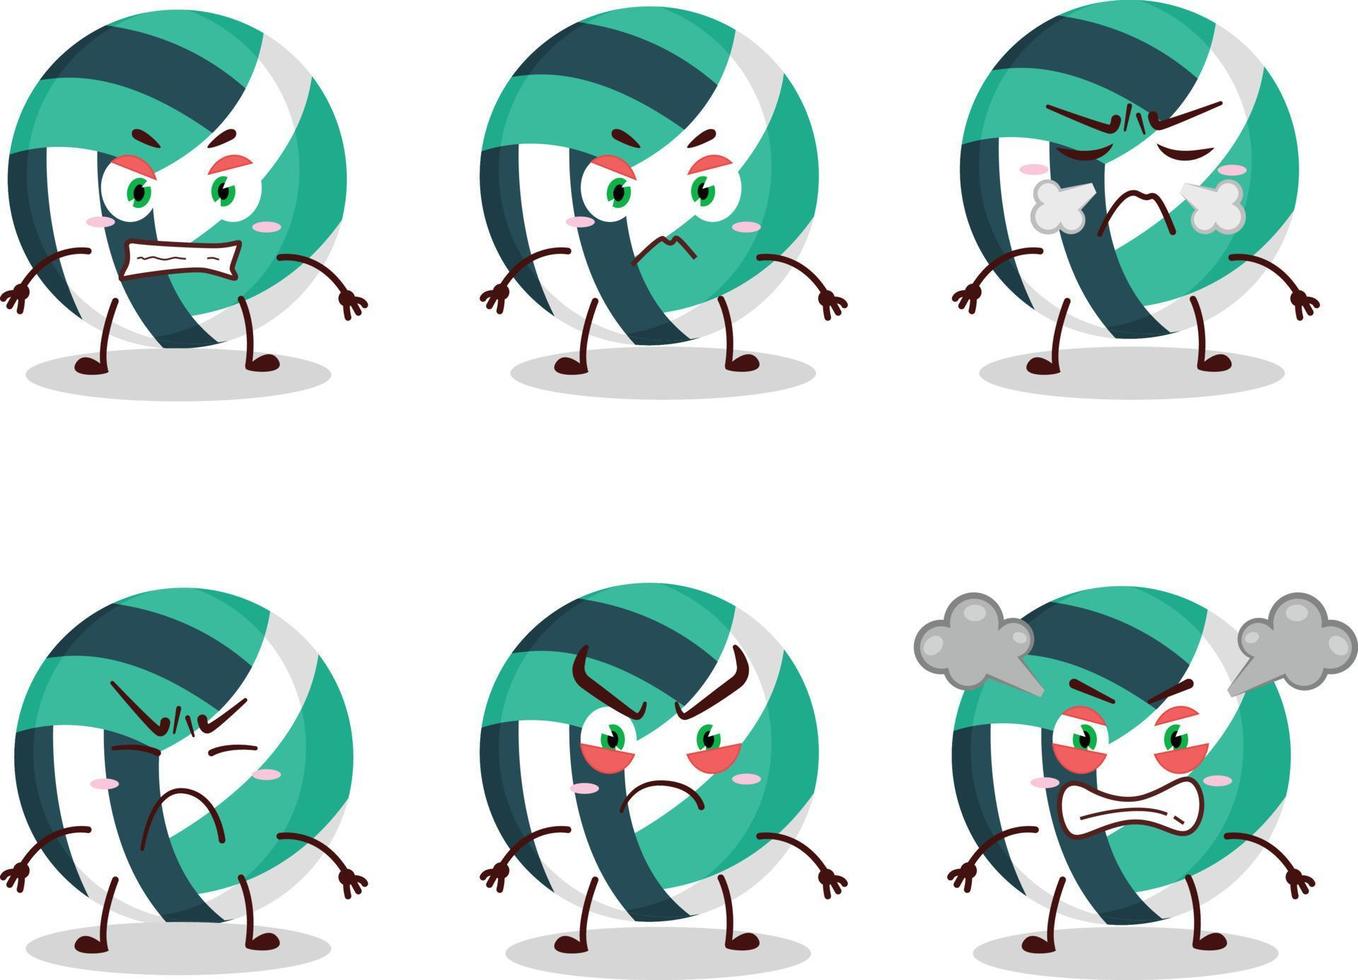 Volley ball cartoon character with various angry expressions vector